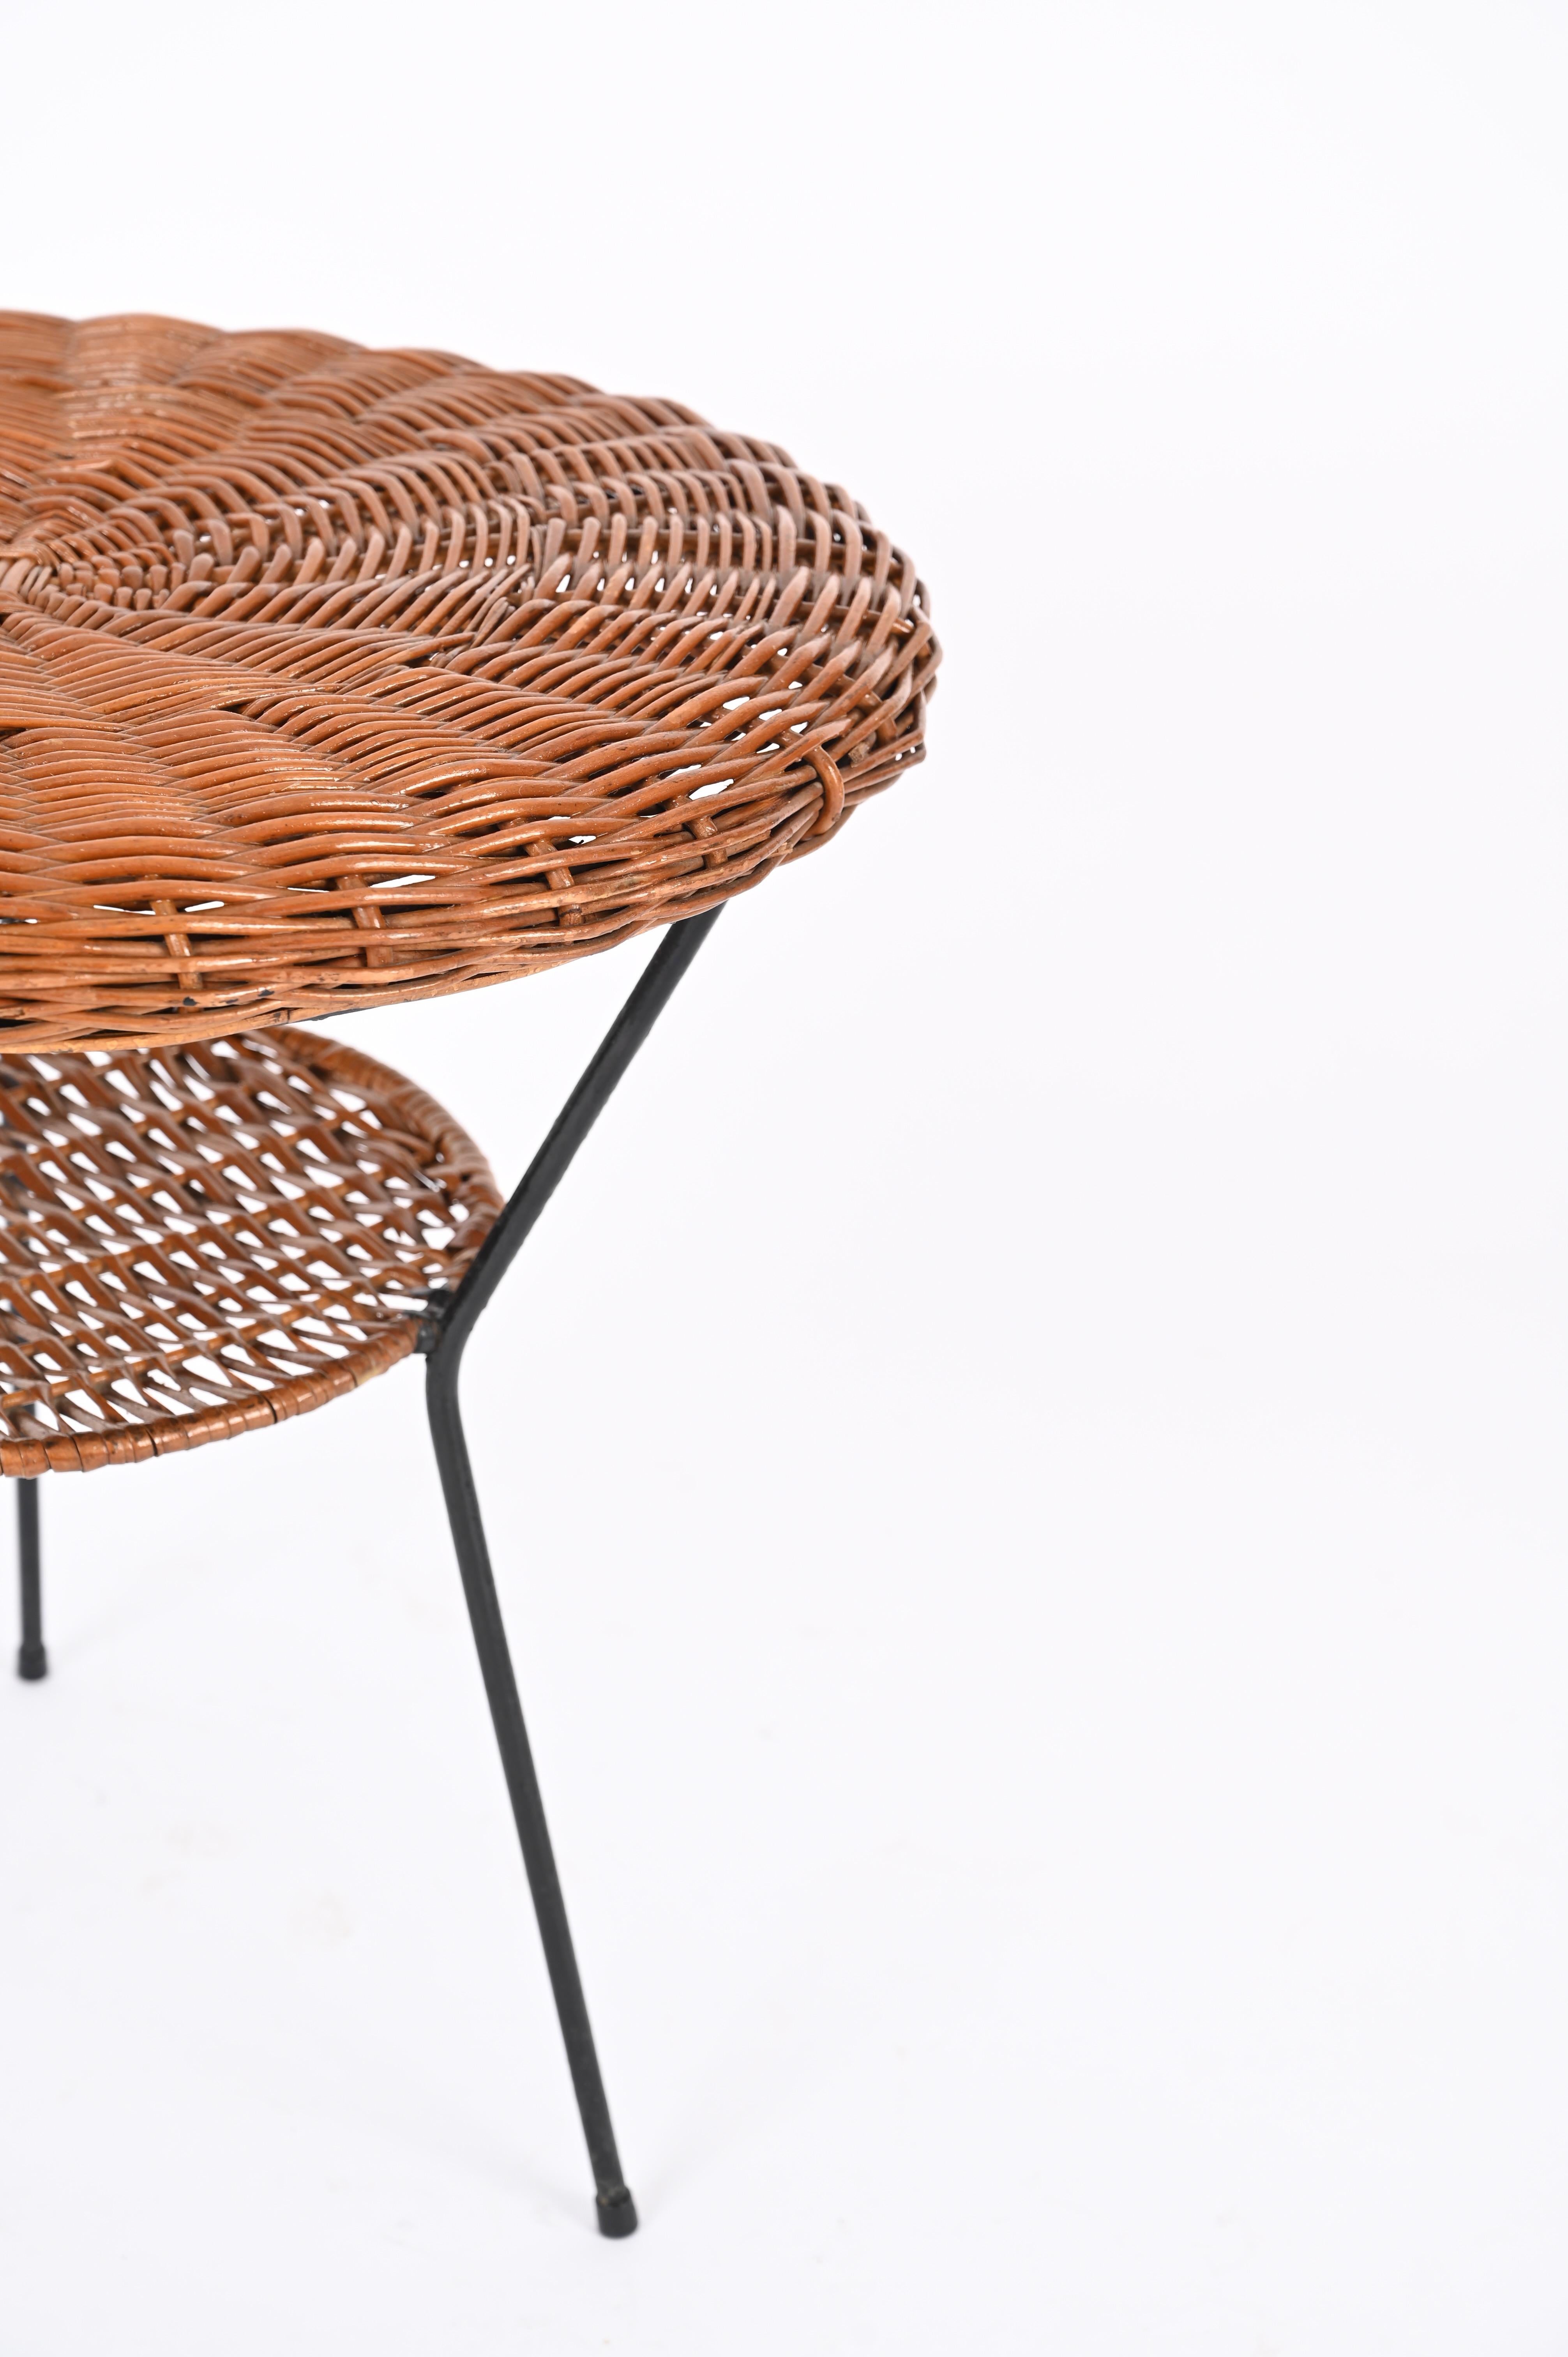 Woven Rattan, Wicker and Iron Two-Tier Round Coffee Table, Matégot, France 1960s For Sale 2